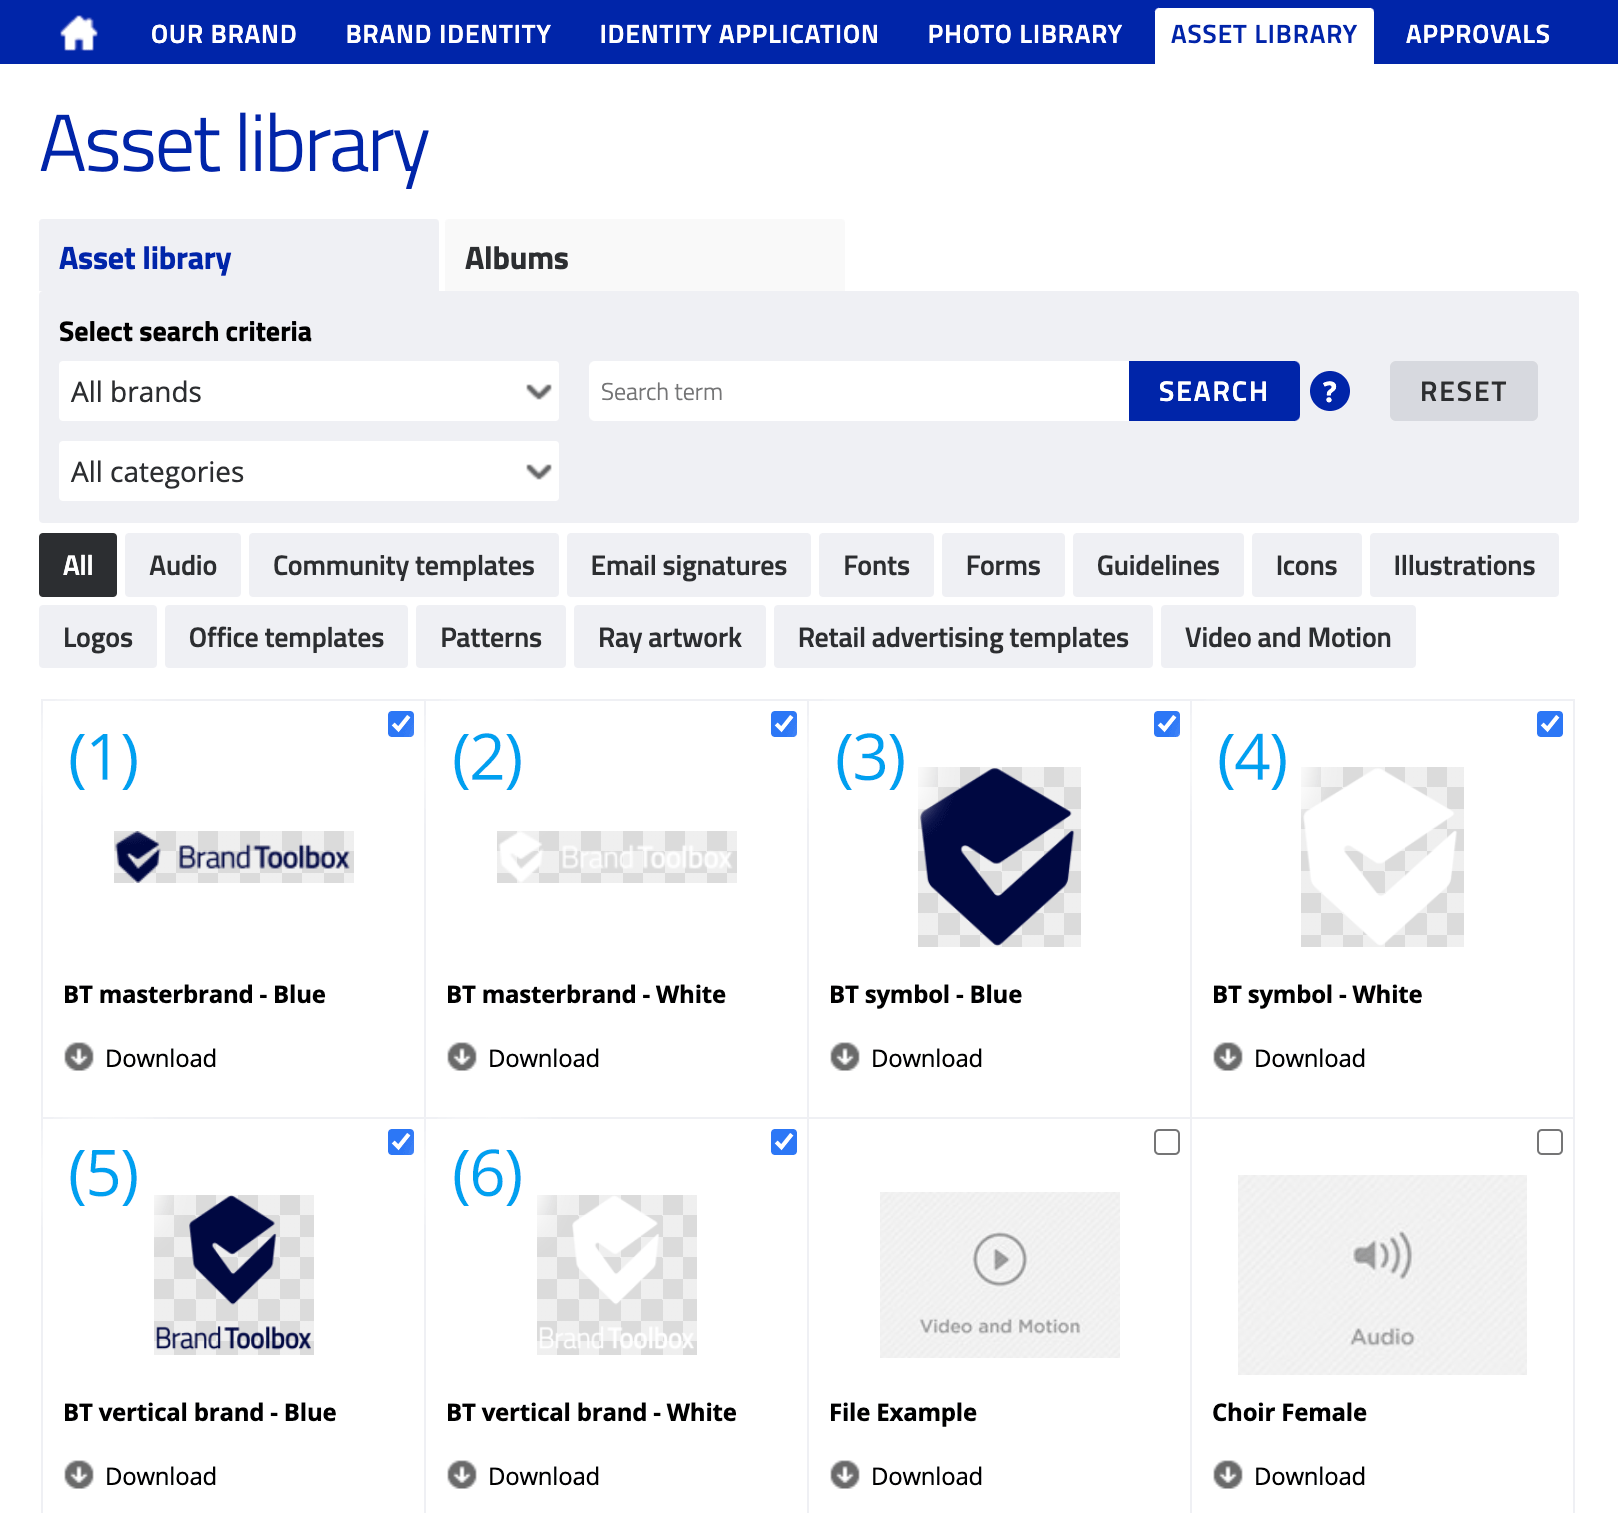 Asset Library frontend thumbnails sorted in default order